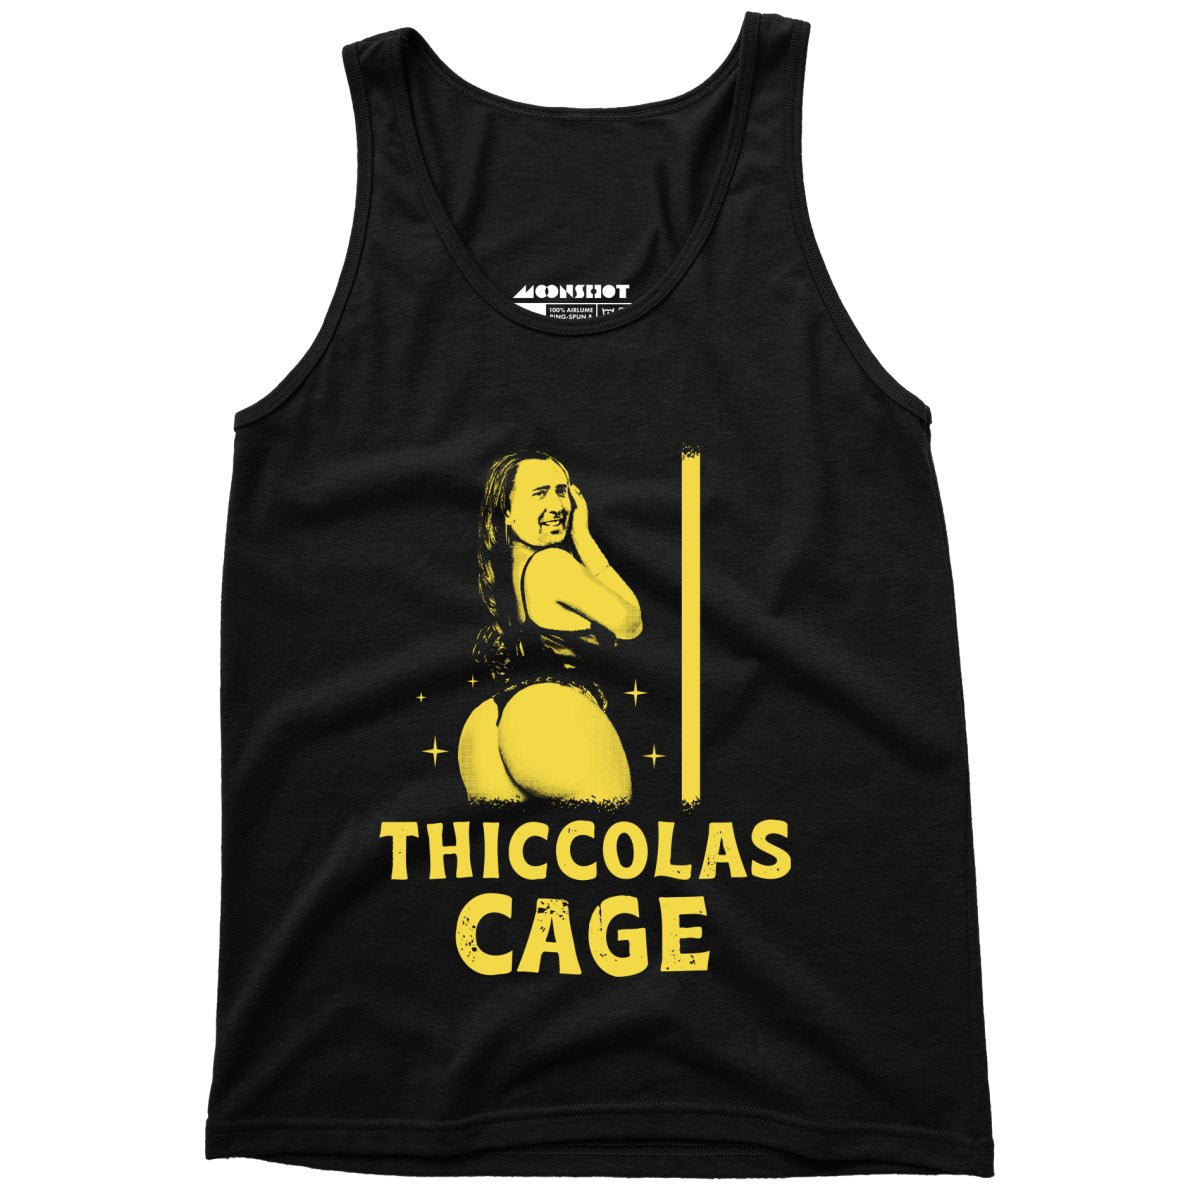 Thiccolas Cage - Unisex Tank Top